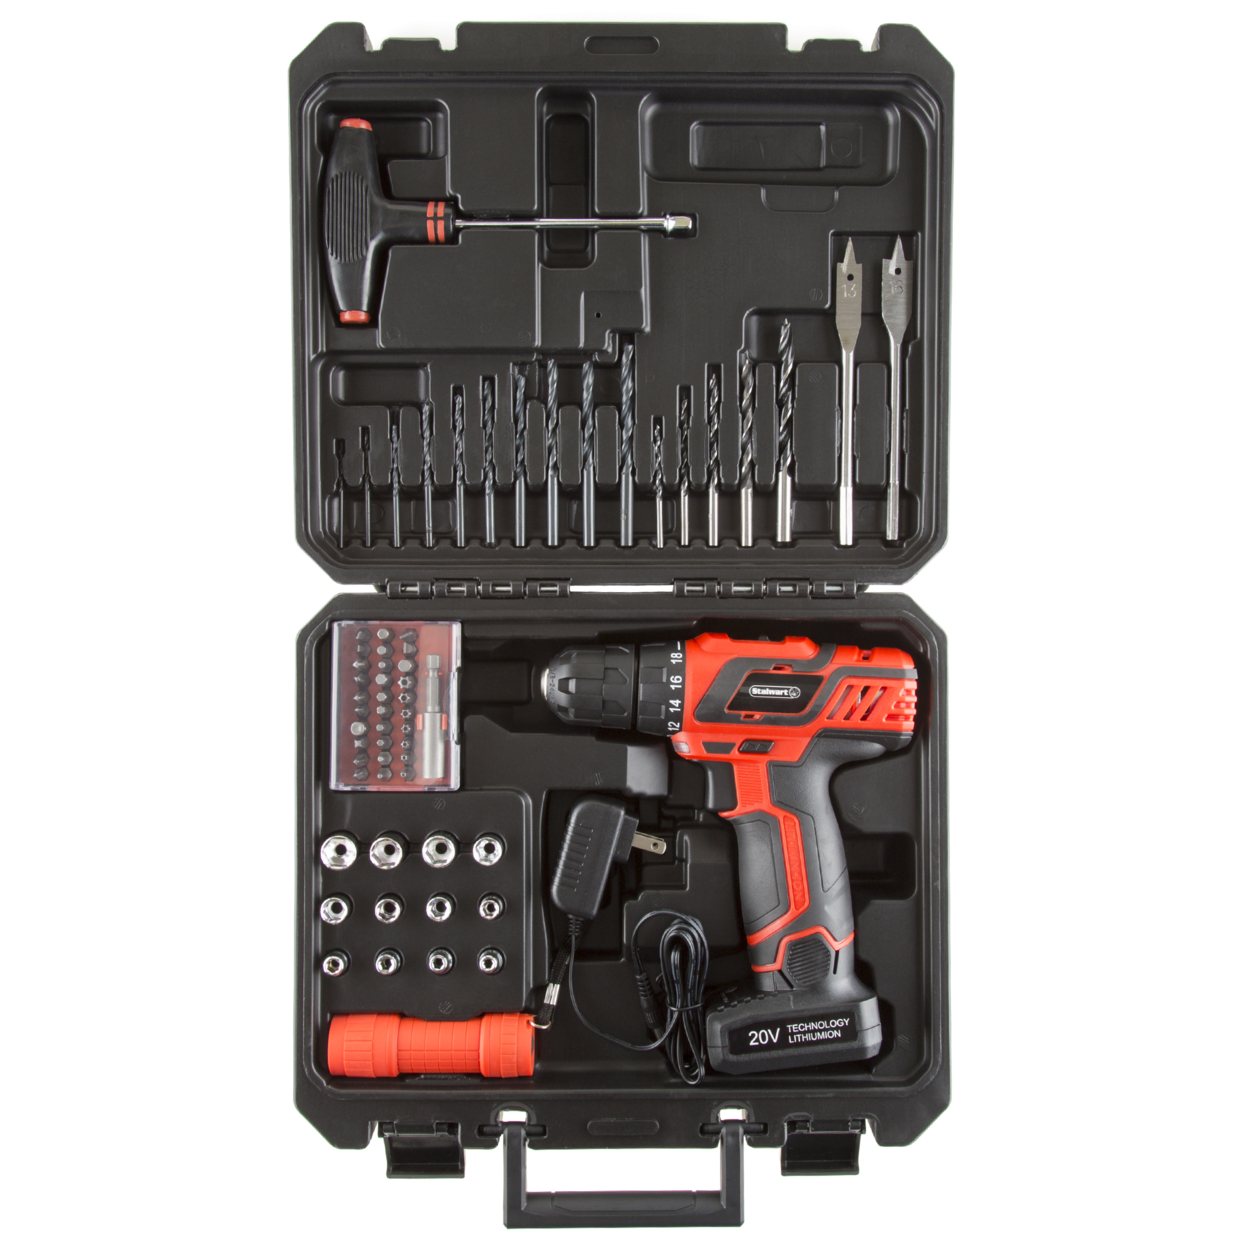 Stalwart 20V Lithium Ion 62 Pc Cordless Drill And Accessory Kit